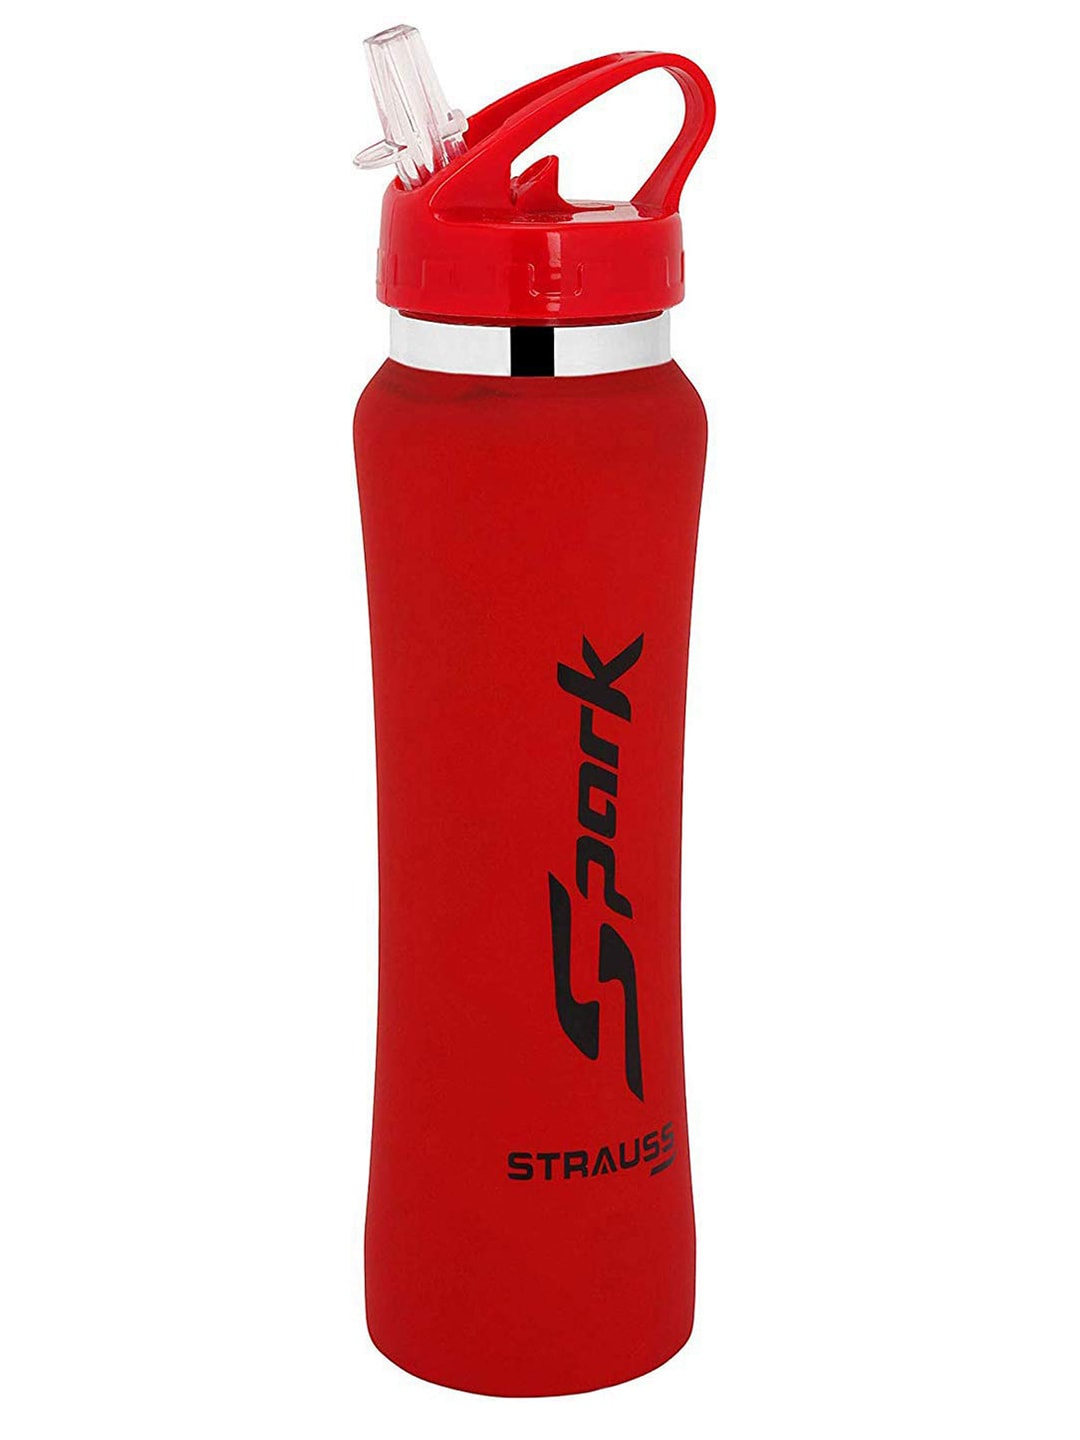 STRAUSS Red & Black Printed Stainless-Steel Bottle 750 ml Price in India